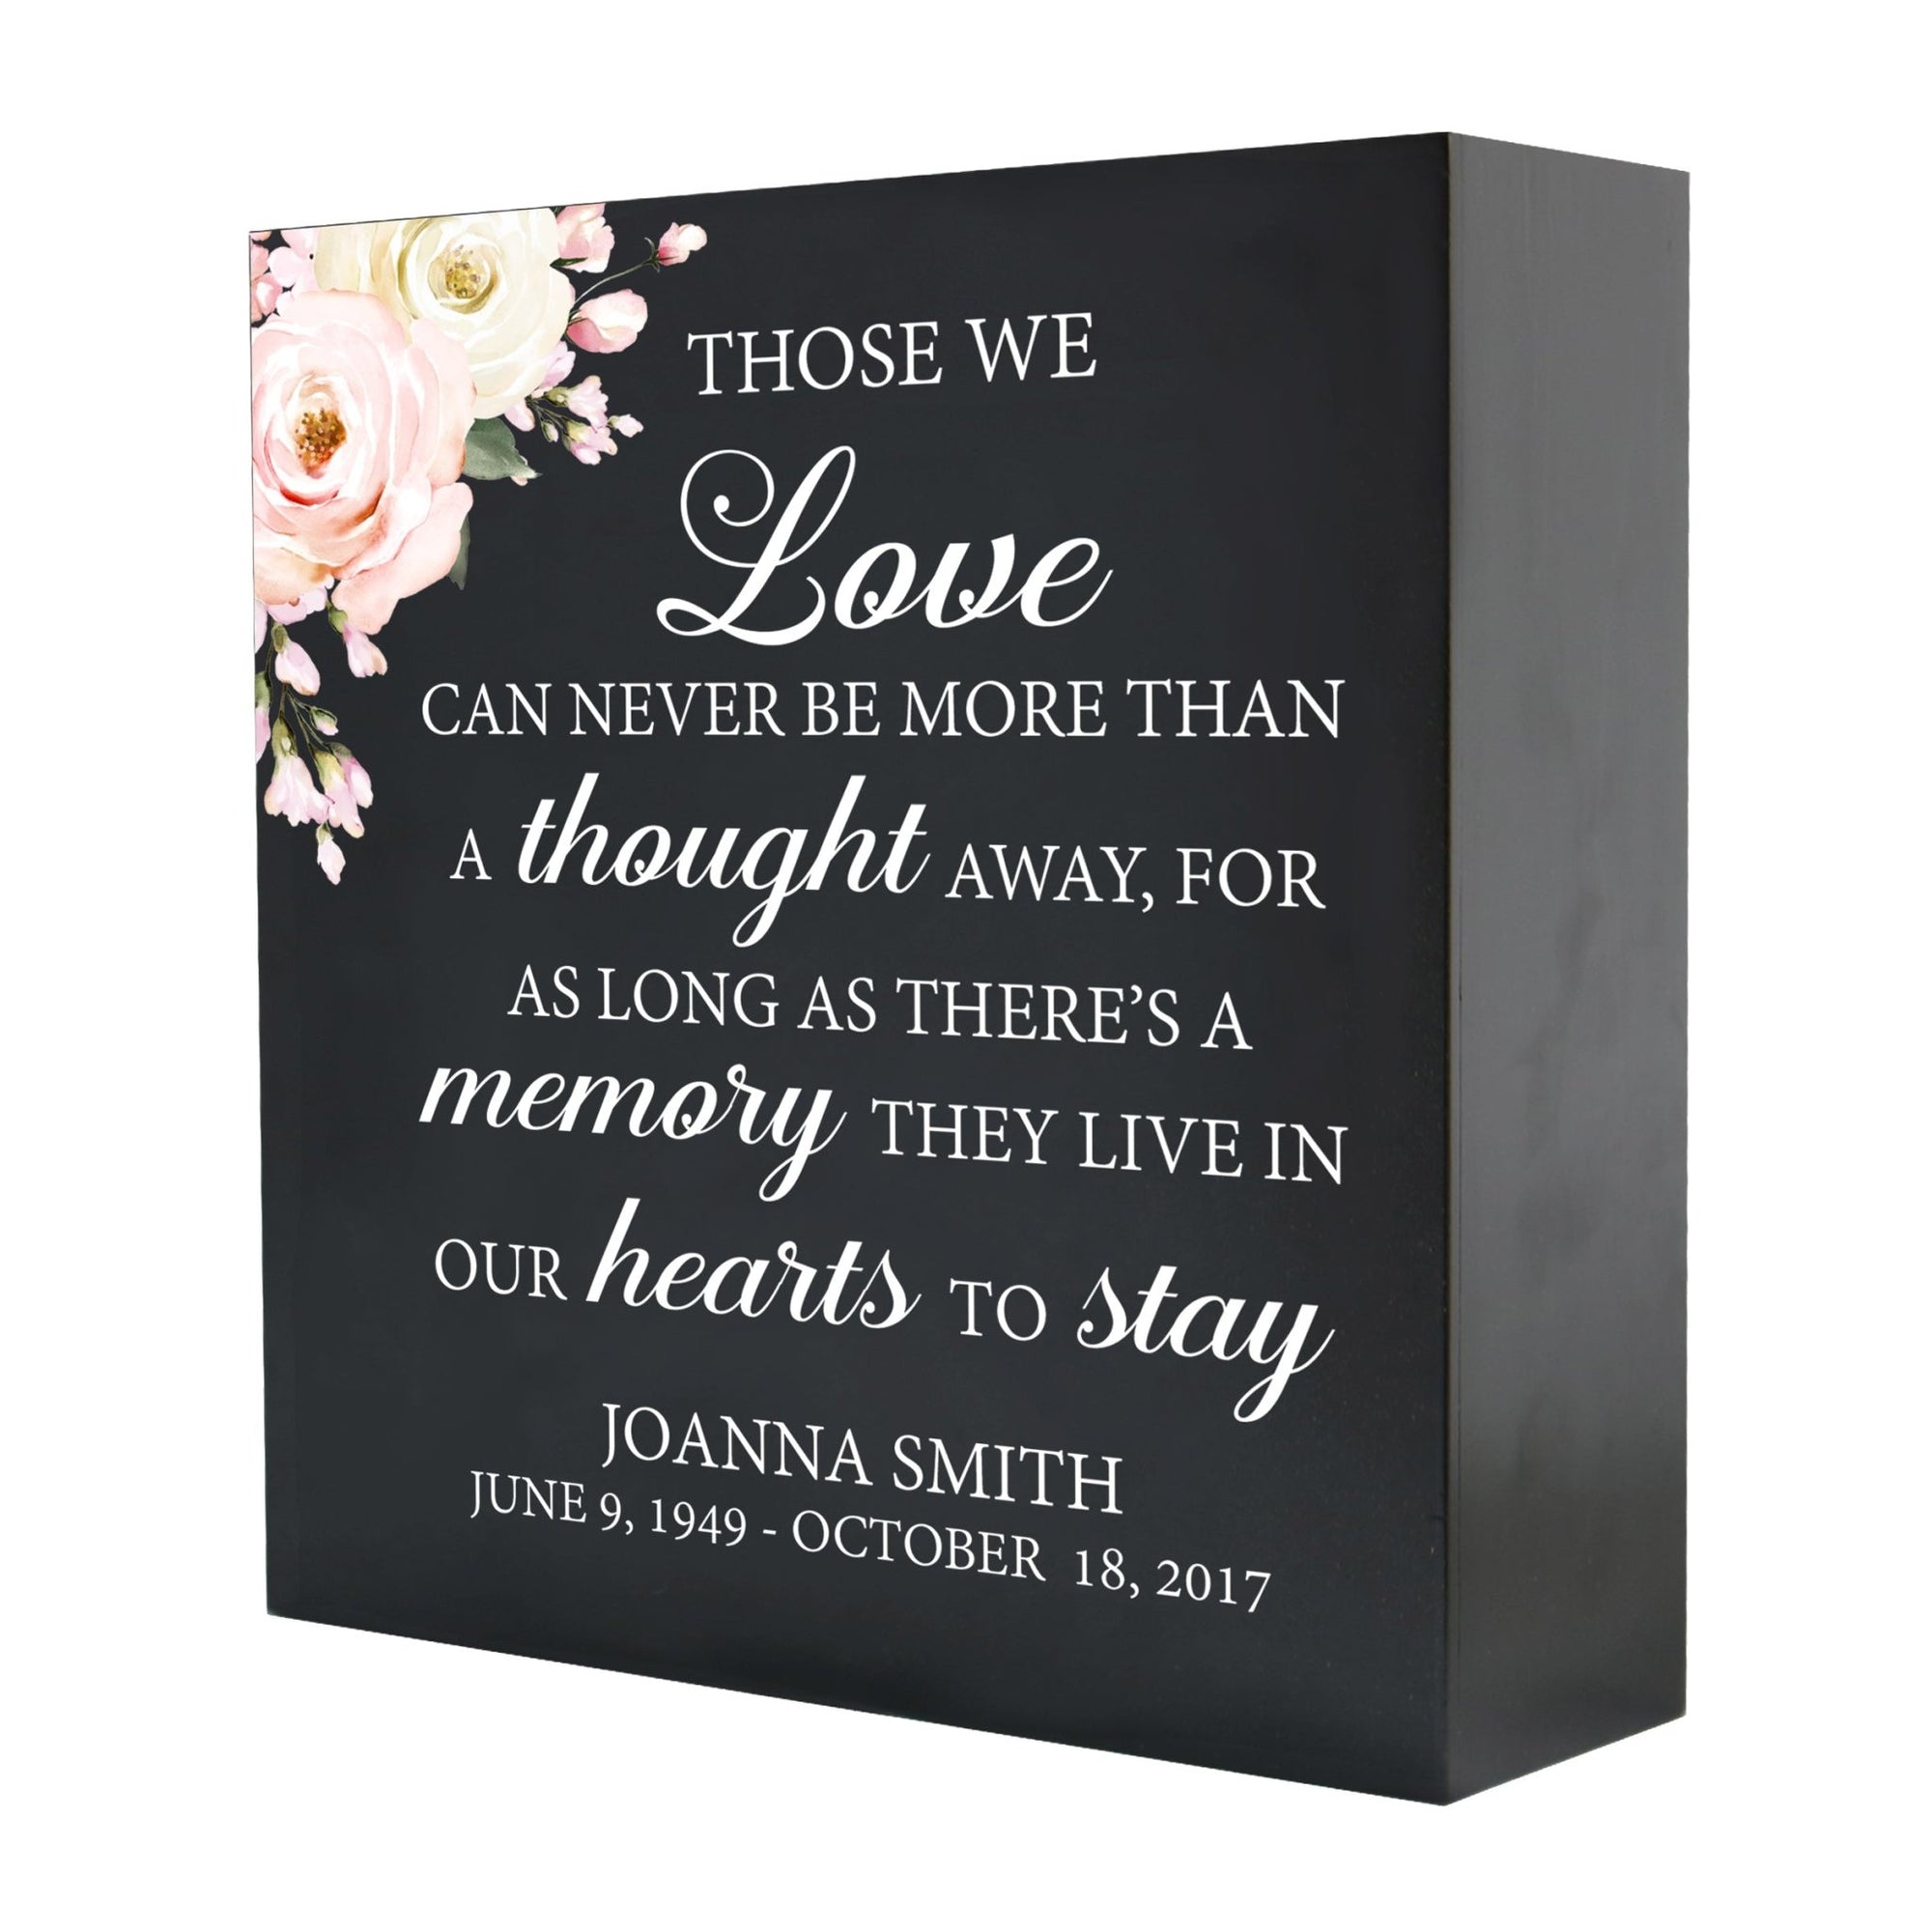 Personalized Modern Inspirational Memorial Wooden Shadow Box and Urn 10x10 holds 189 cu in of Human Ashes - Those We Love (Black) - LifeSong Milestones